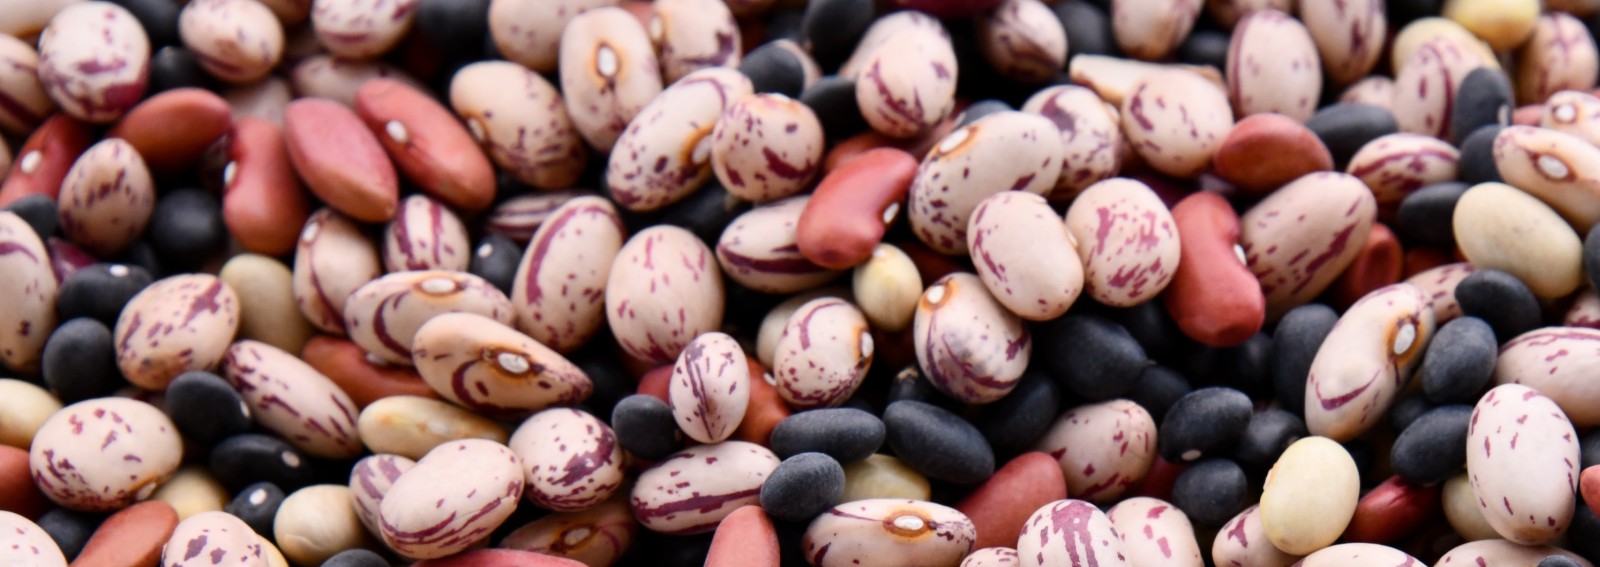 legumes-food-nutrition-health-diet-weight-loss